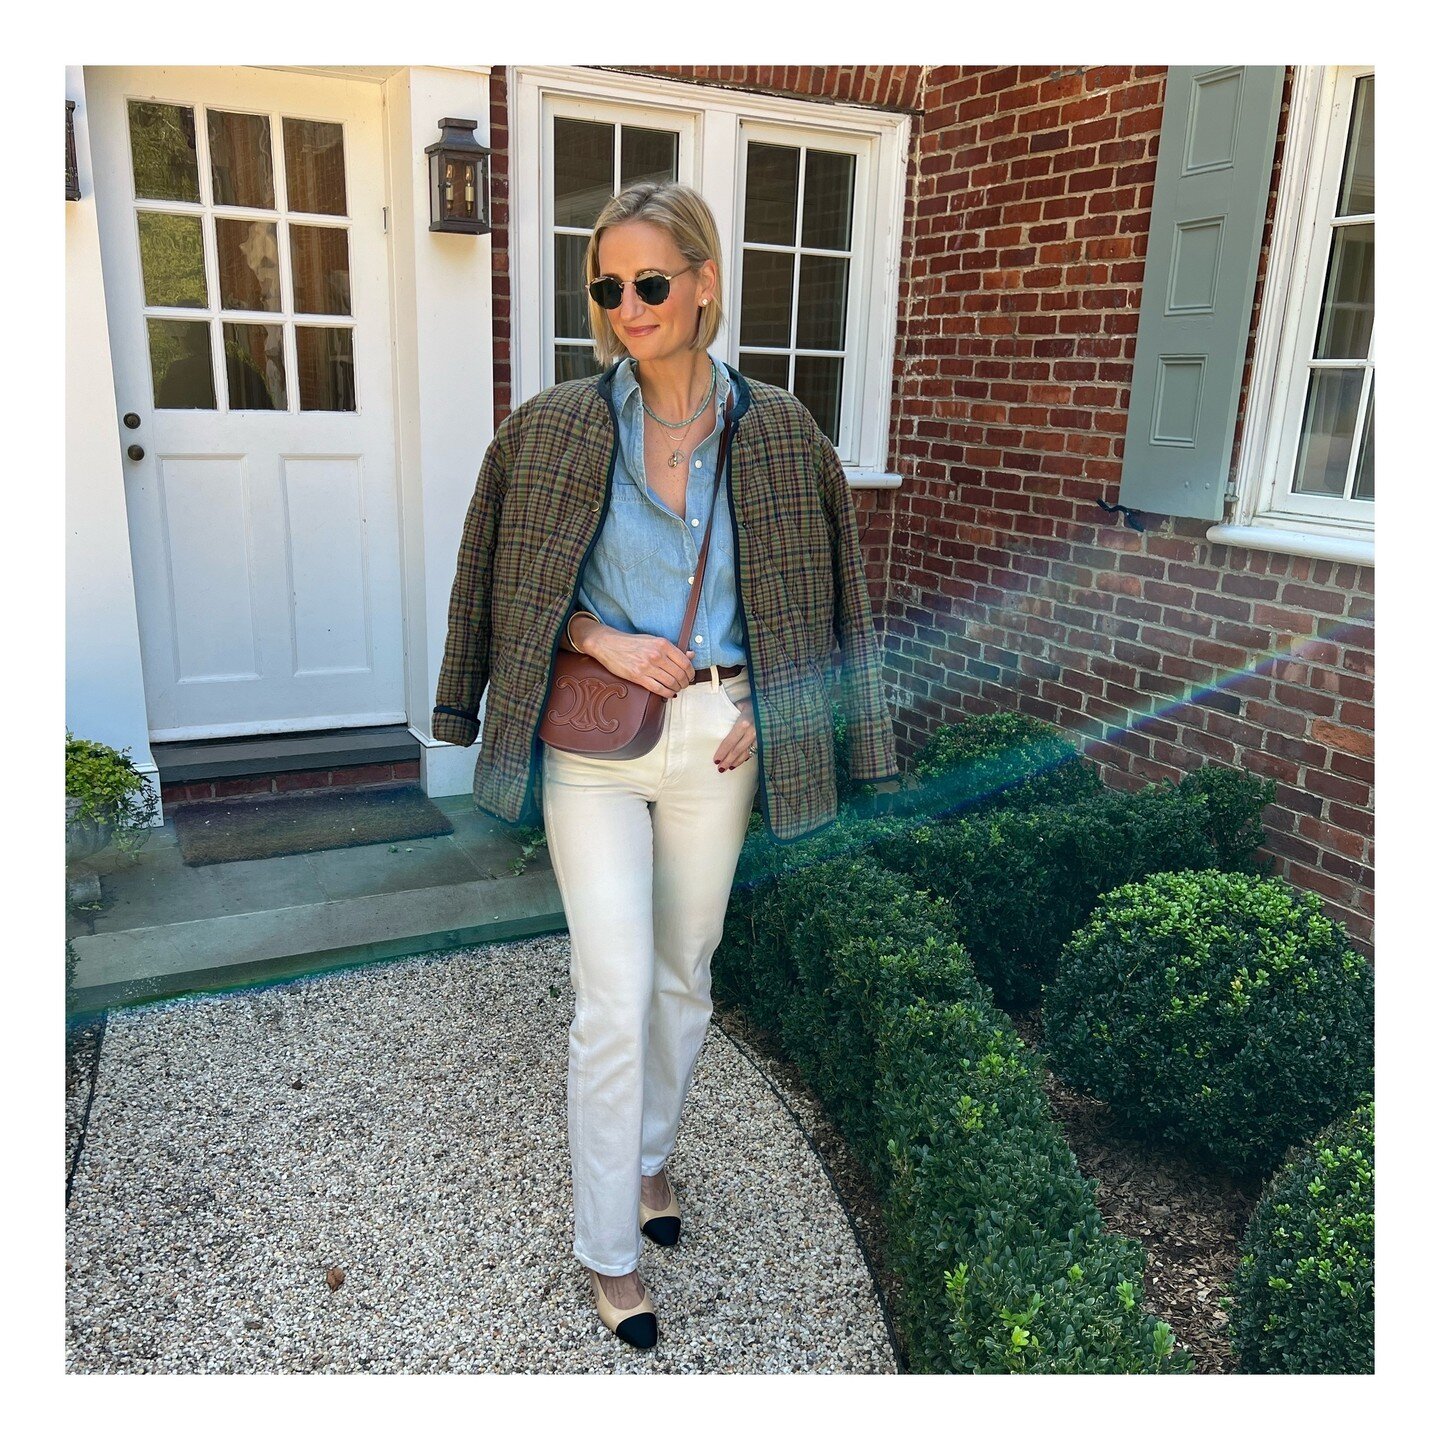 I love the idea of having a &ldquo;capsule&rdquo; wardrobe- sticking to pieces and silhouettes that work for your body and feel comfortable. My go to is always a button down and great fitting jeans. It&rsquo;s easy to dress it up with a great shoe an